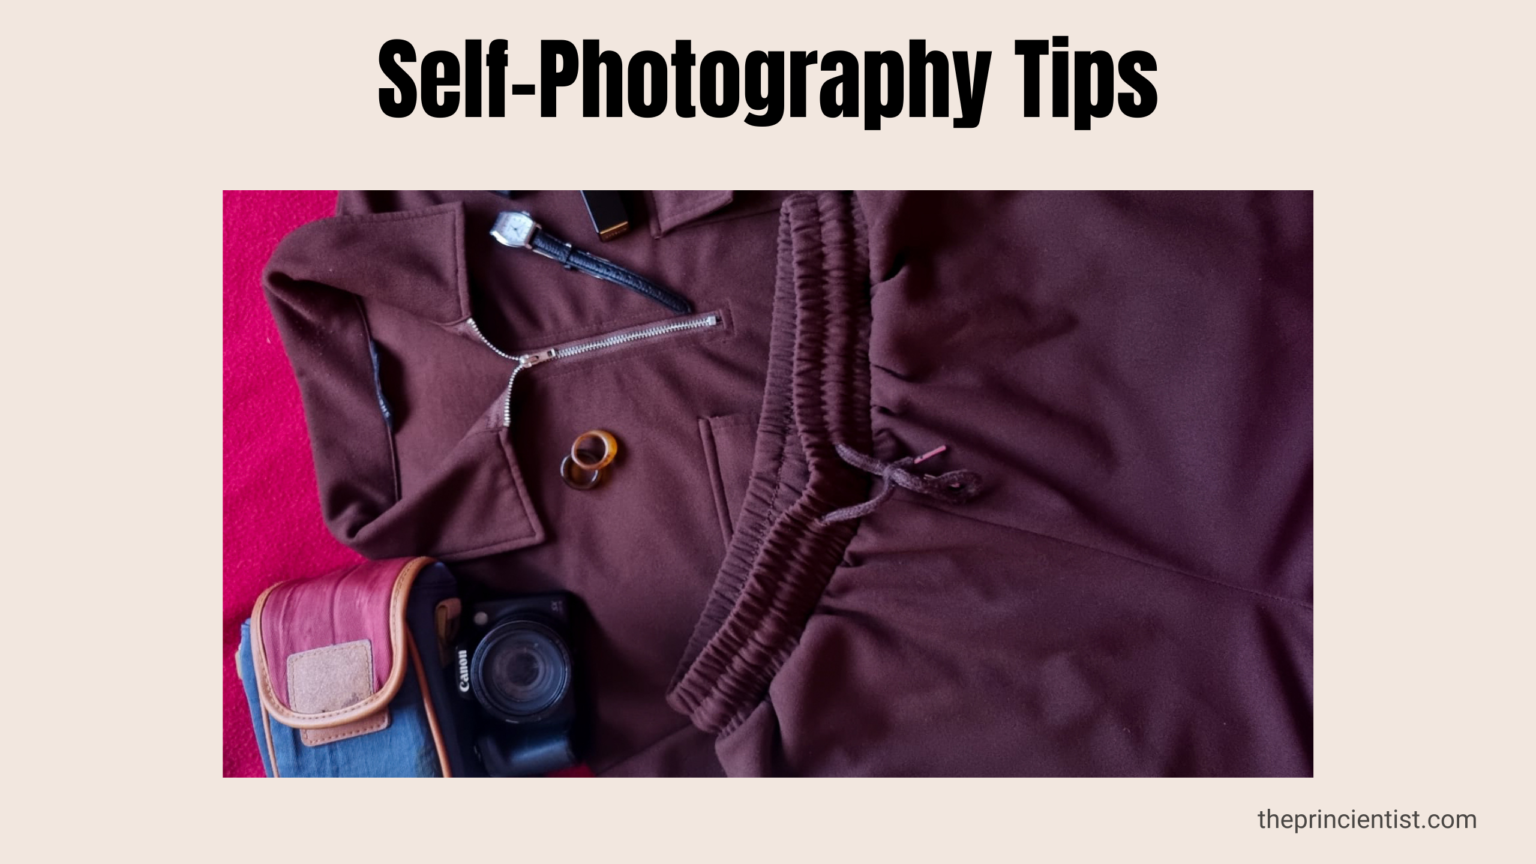 self-photography-tips-for-beginners-preprae the look the day before taking photos